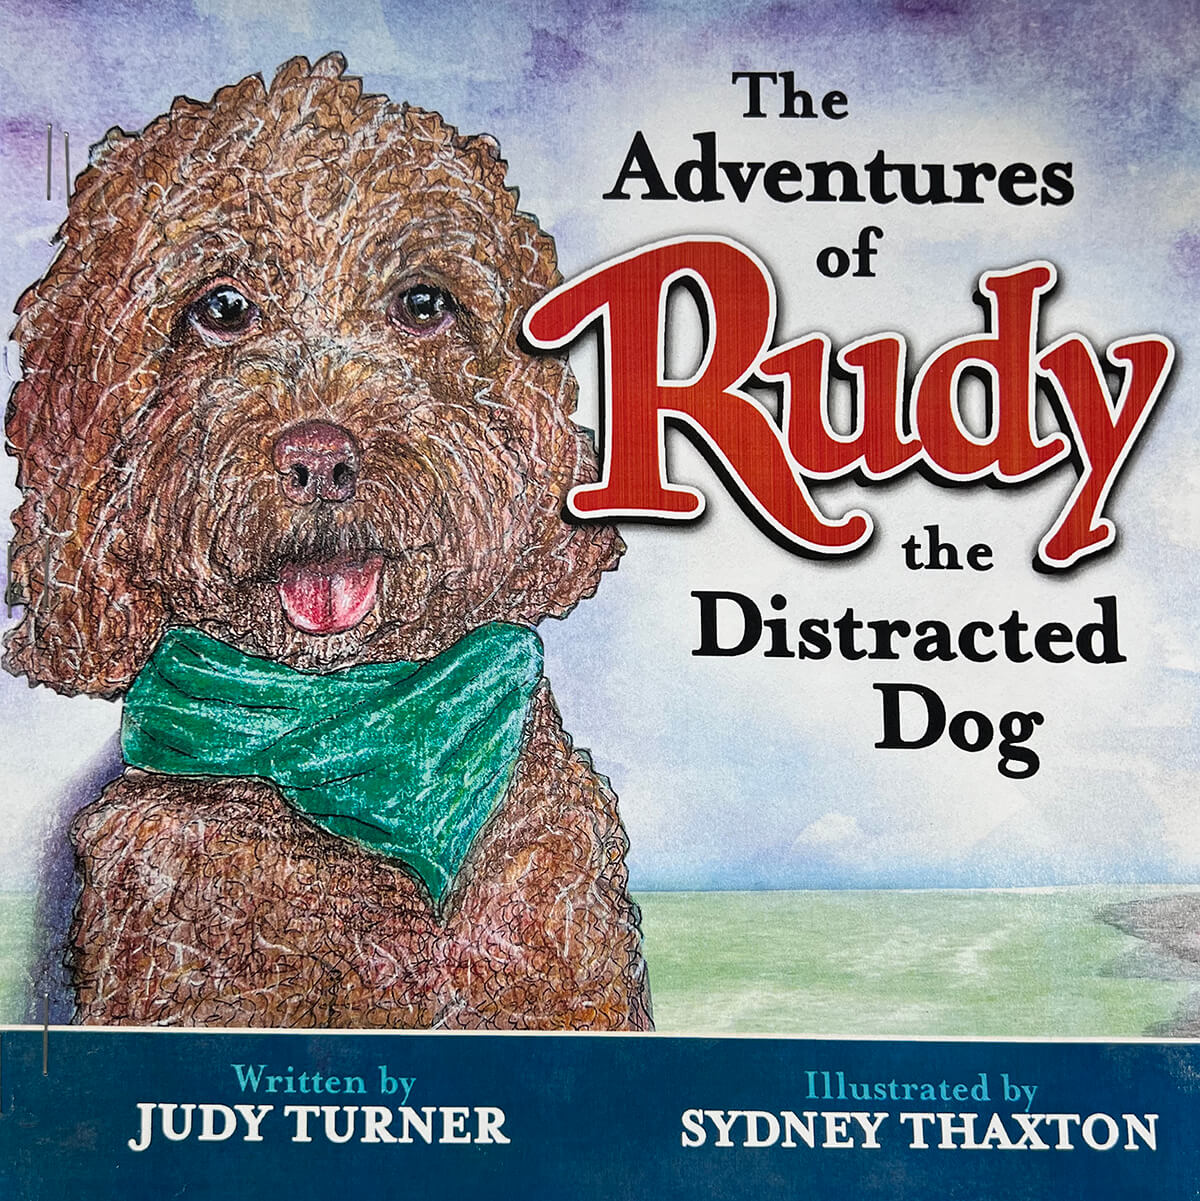 The Adventures of Rudy the Distracted Dog